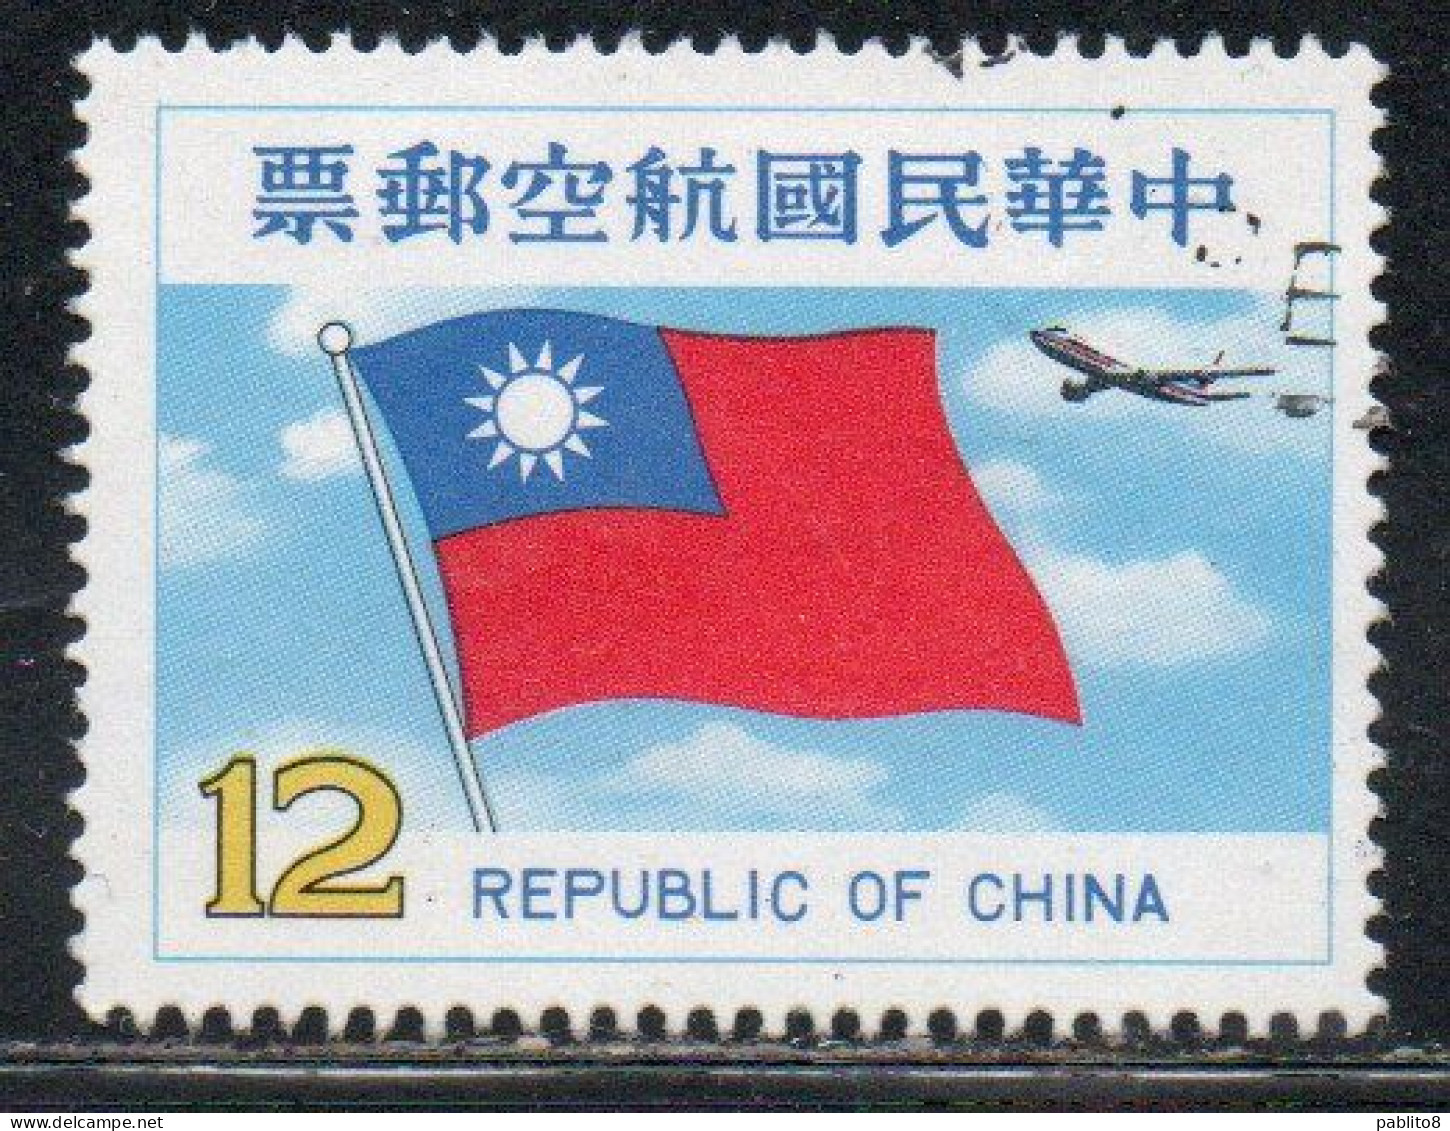 CHINA REPUBLIC CINA TAIWAN FORMOSA 1980 AIR POST MAIL AIRMAIL NATIONAL FLAG JET 12$ USED USATO OBLITERE' - Airmail